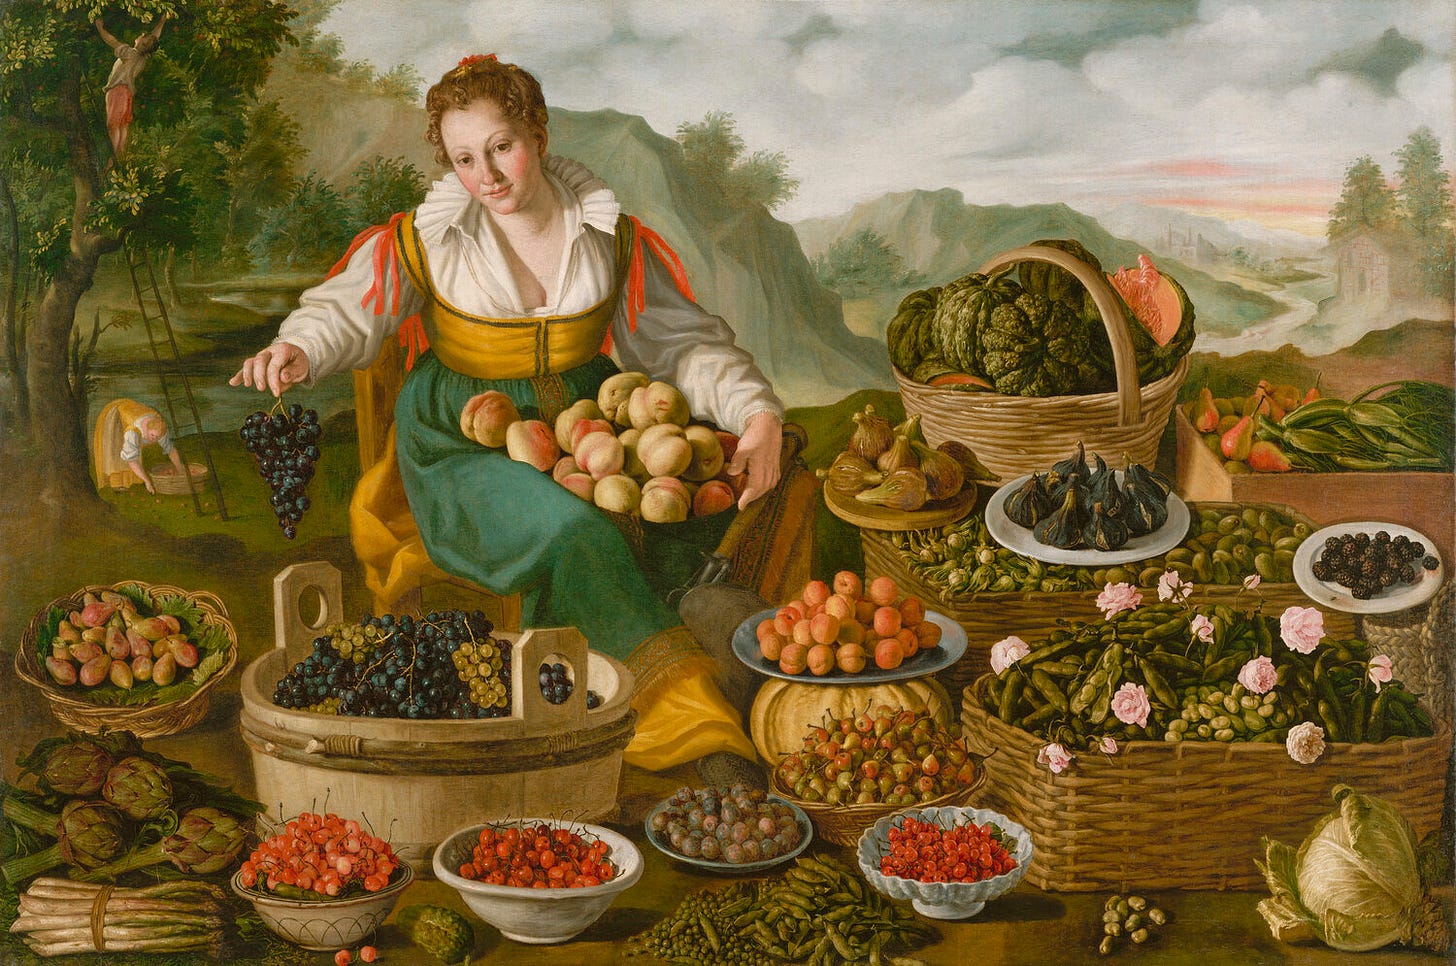 Historically dressed Italian woman with many peaches on the lap of her green skirt. She us surrounded by bowls of perfect looking fruits of many types including figs, apricots, cherries, grapes. She also has beans in pods, artichokes and bunches of white asparagus, peas, a cabbage and courgettes with flowers attached. She is in a rural landscape with 2 workers behind her.